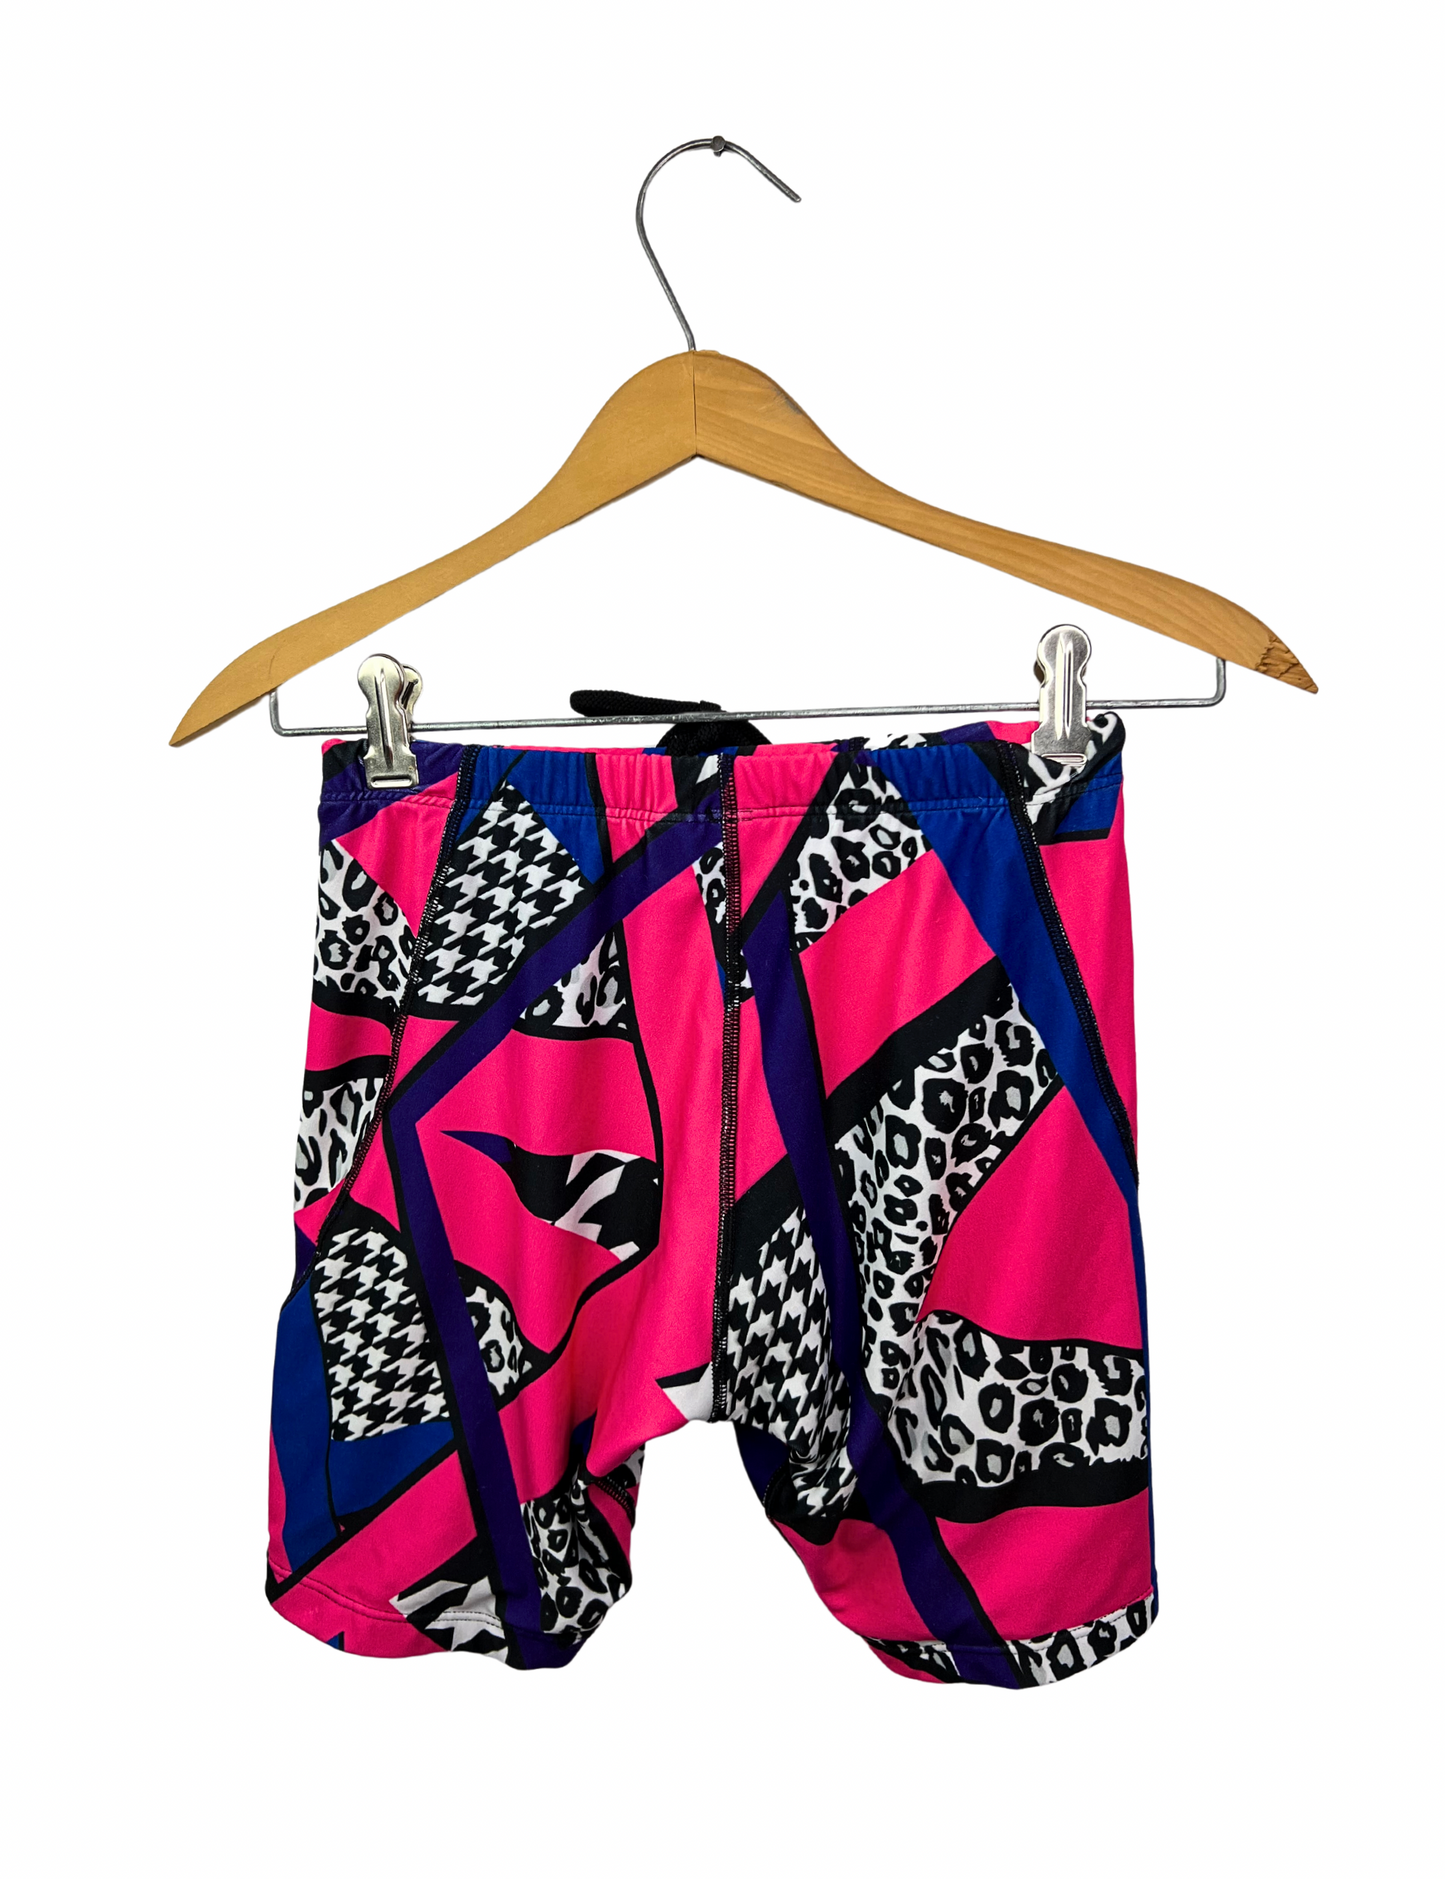 90’s Neon Leopard Print Houndstooth Bike Shorts Size XS/S